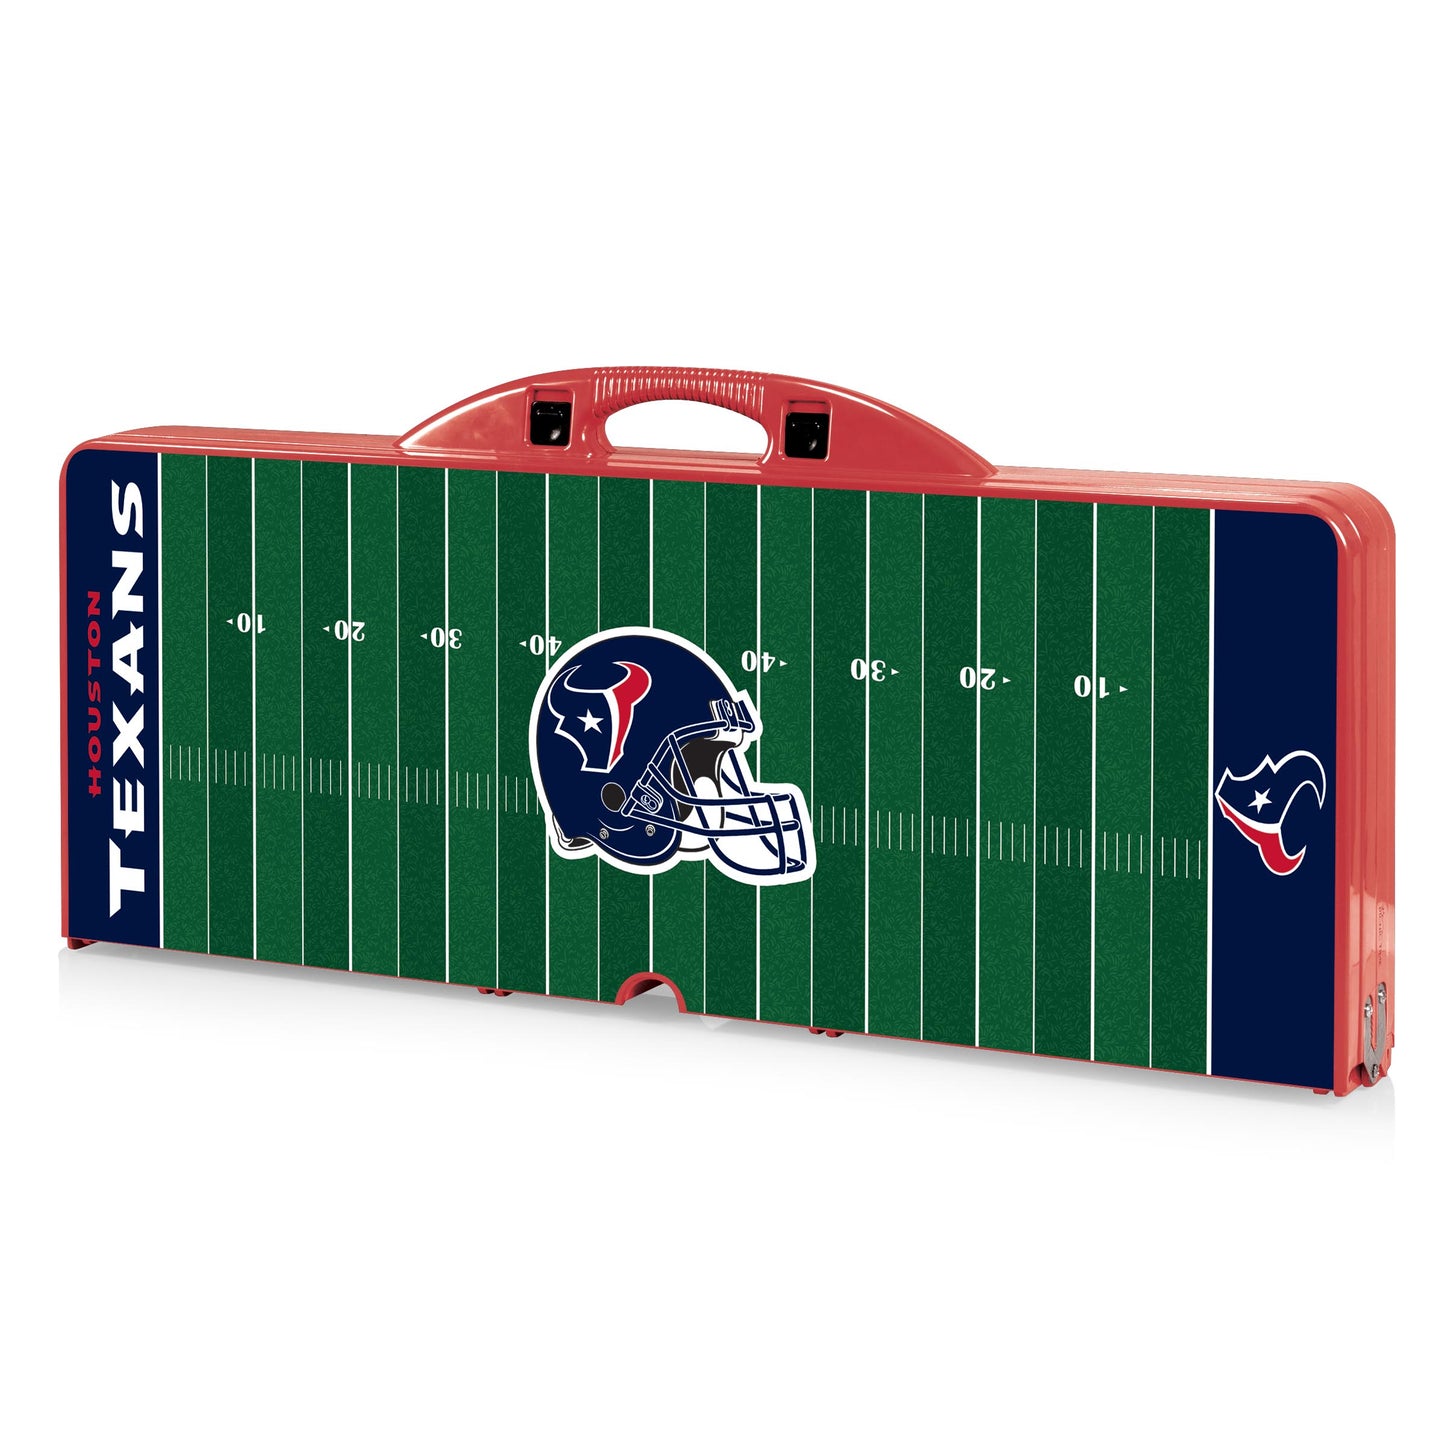 Houston Texans - Picnic Table Portable Folding Table with Seats - Football Field Style